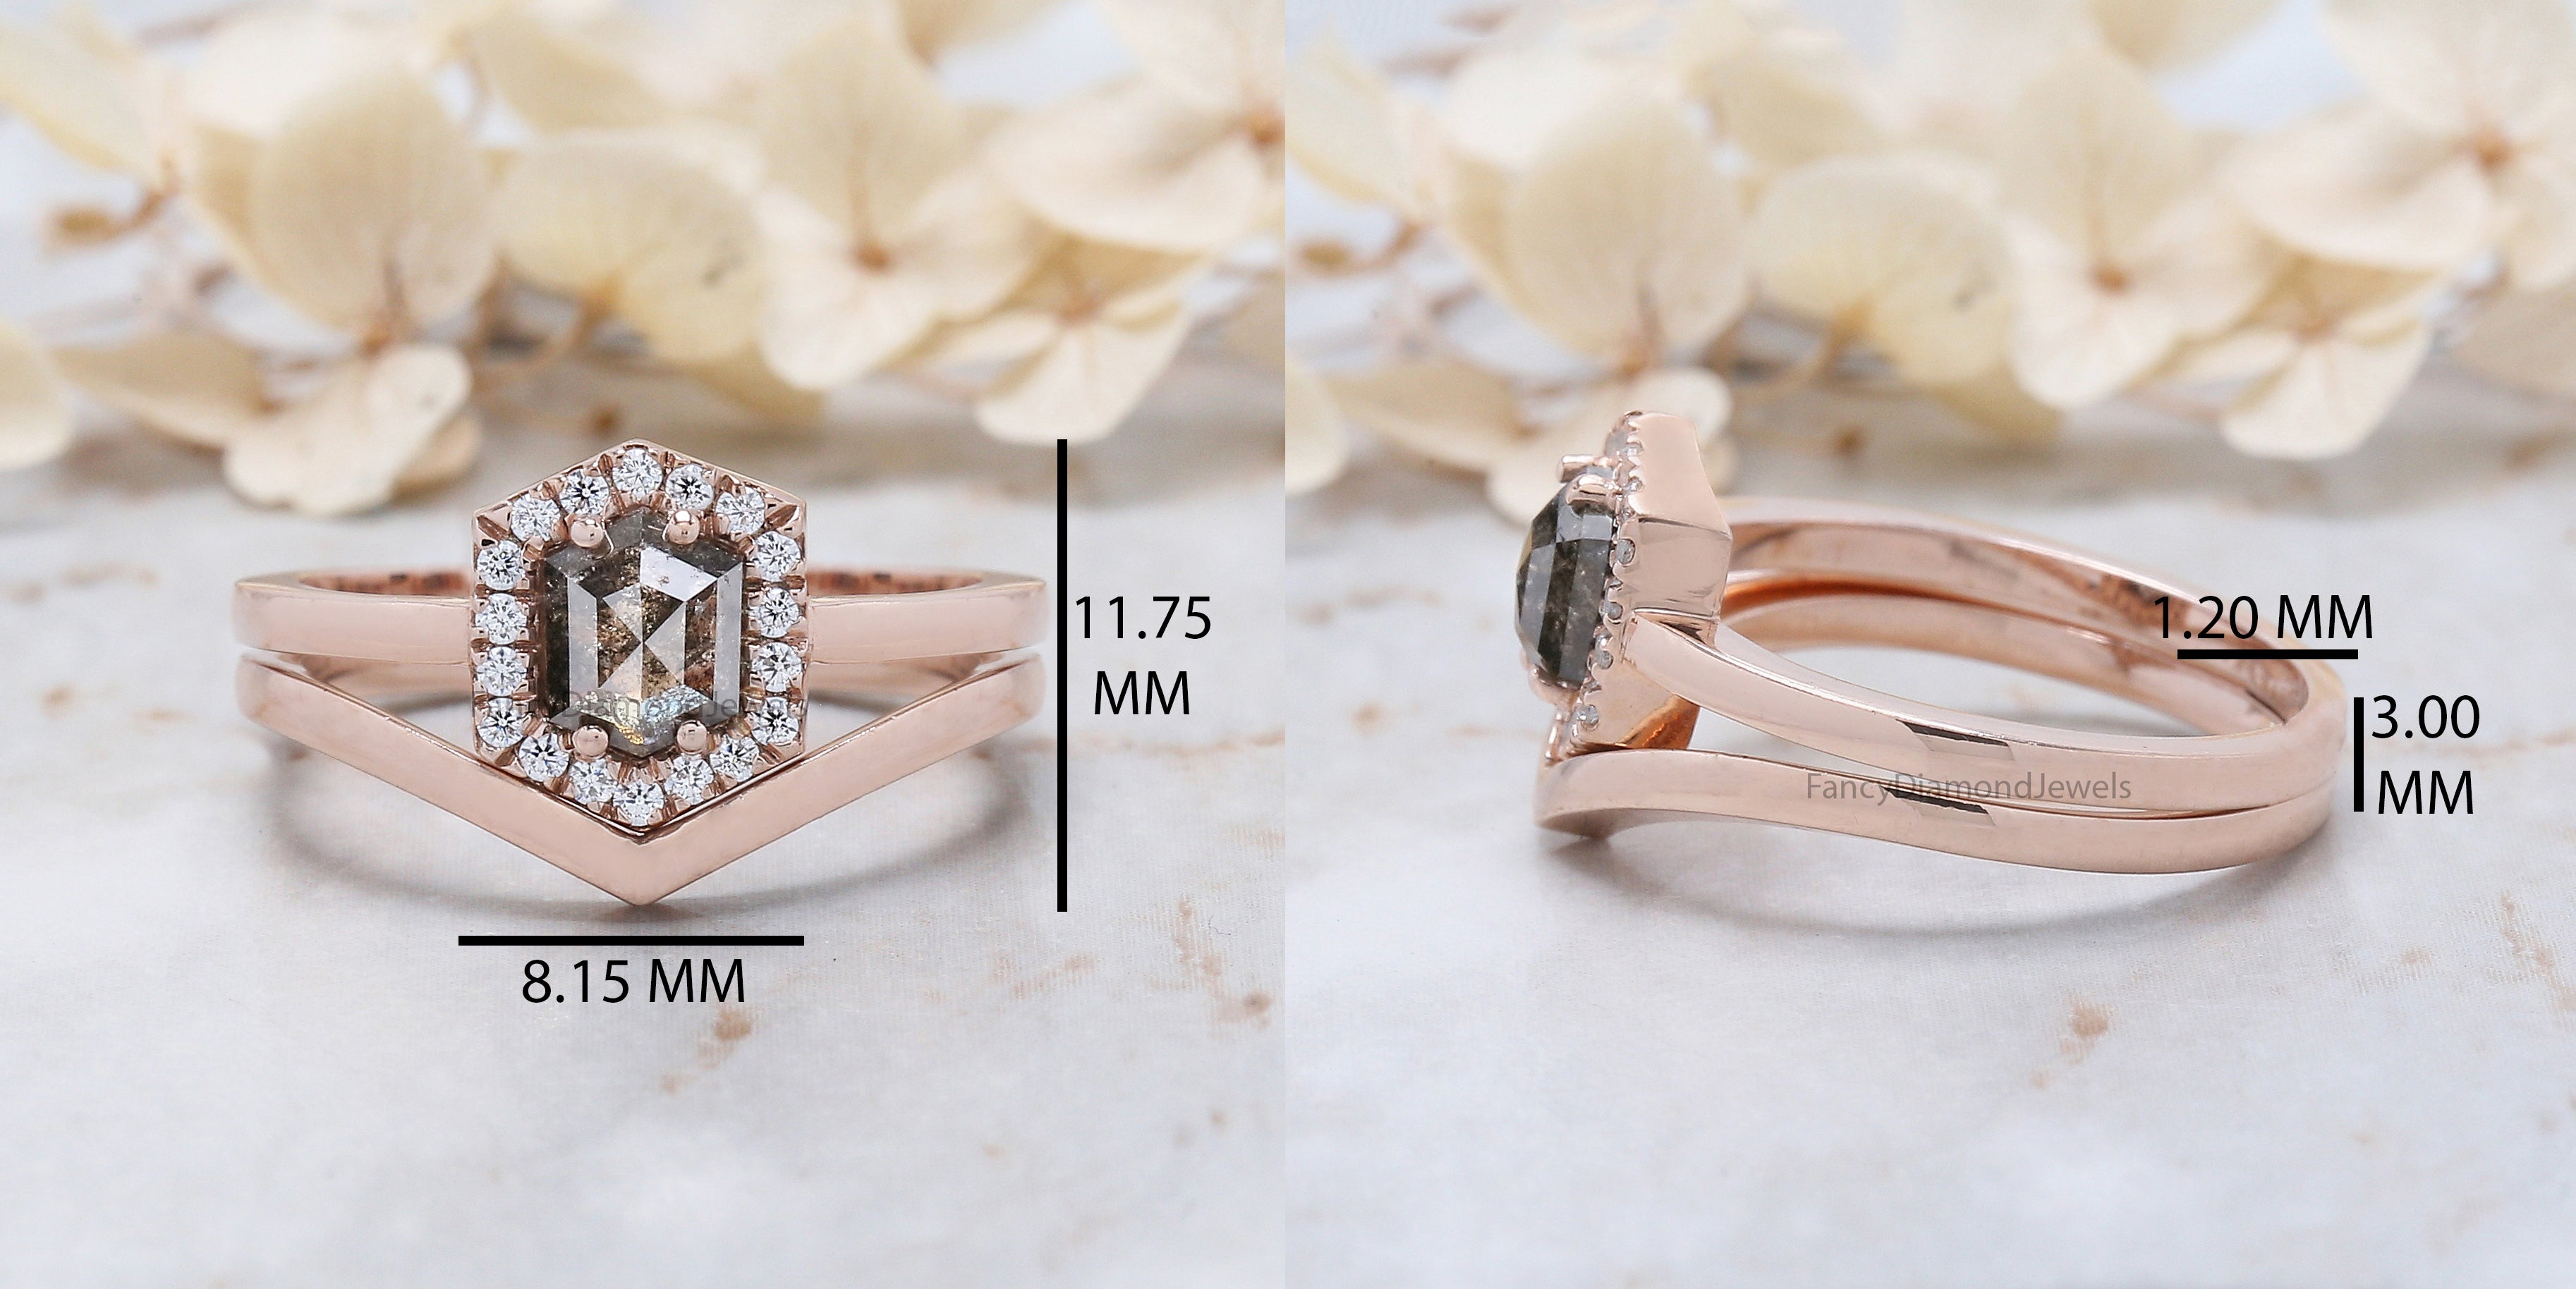 Hexagon Cut Salt And Pepper Diamond Ring 0.77 Ct 6.05 MM Hexagon Diamond Ring 14K Solid Rose Gold Silver Engagement Ring Gift For Her QN1223